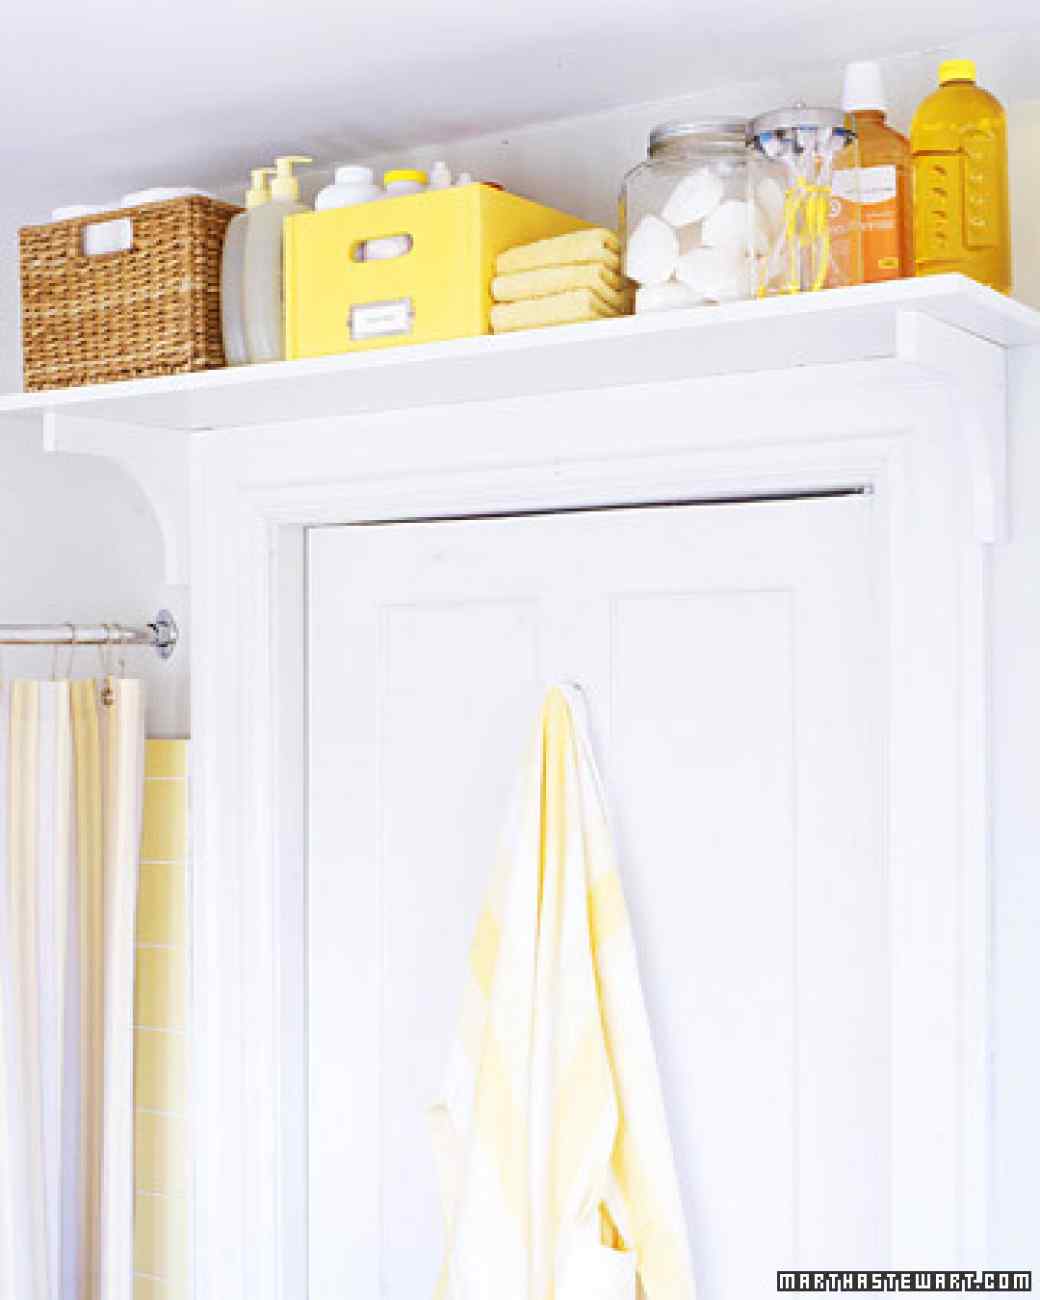 install a shelf on top of your bathroom door to store extra grooming and personal hygiene products